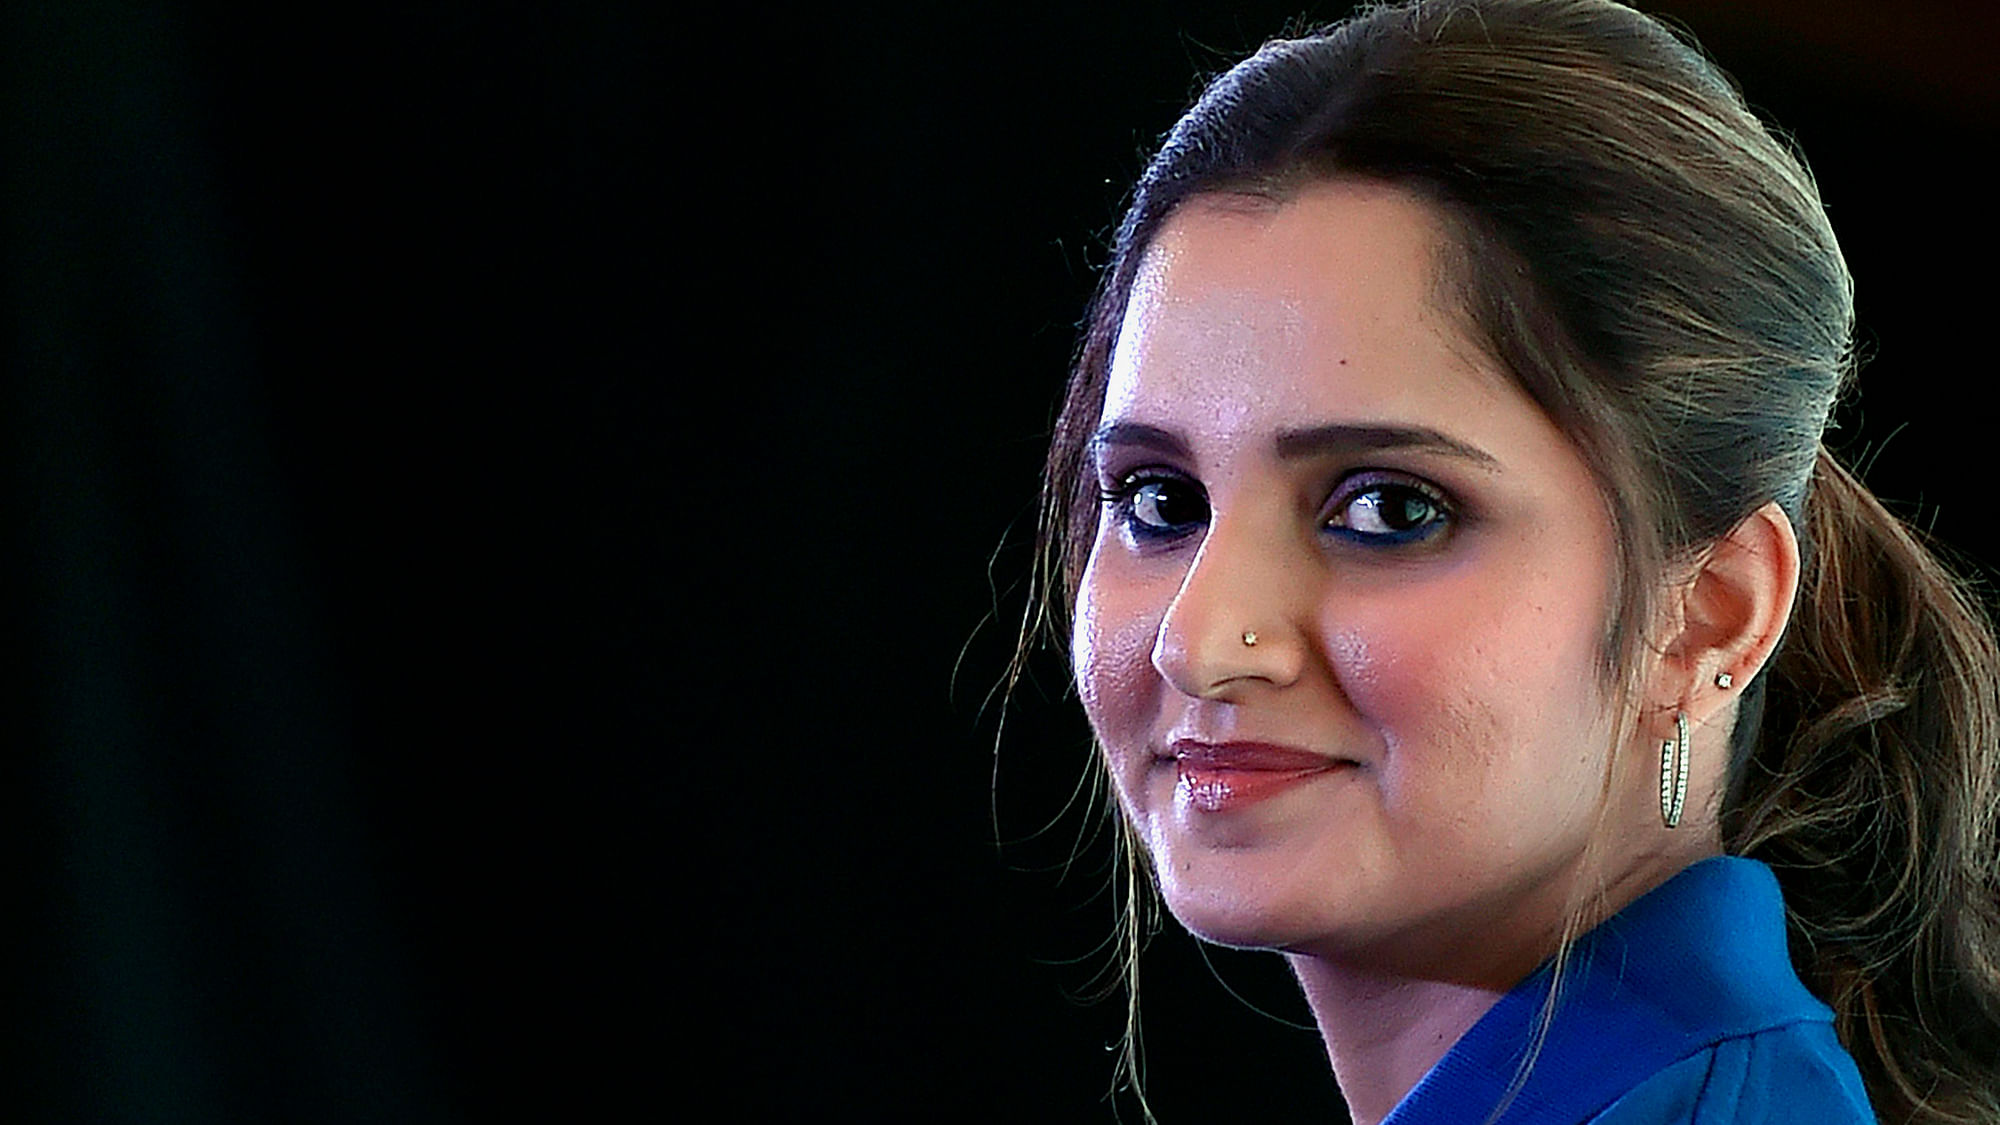 Sania Mirza spoke to The Quint on the sidelines of an event in New Delhi.